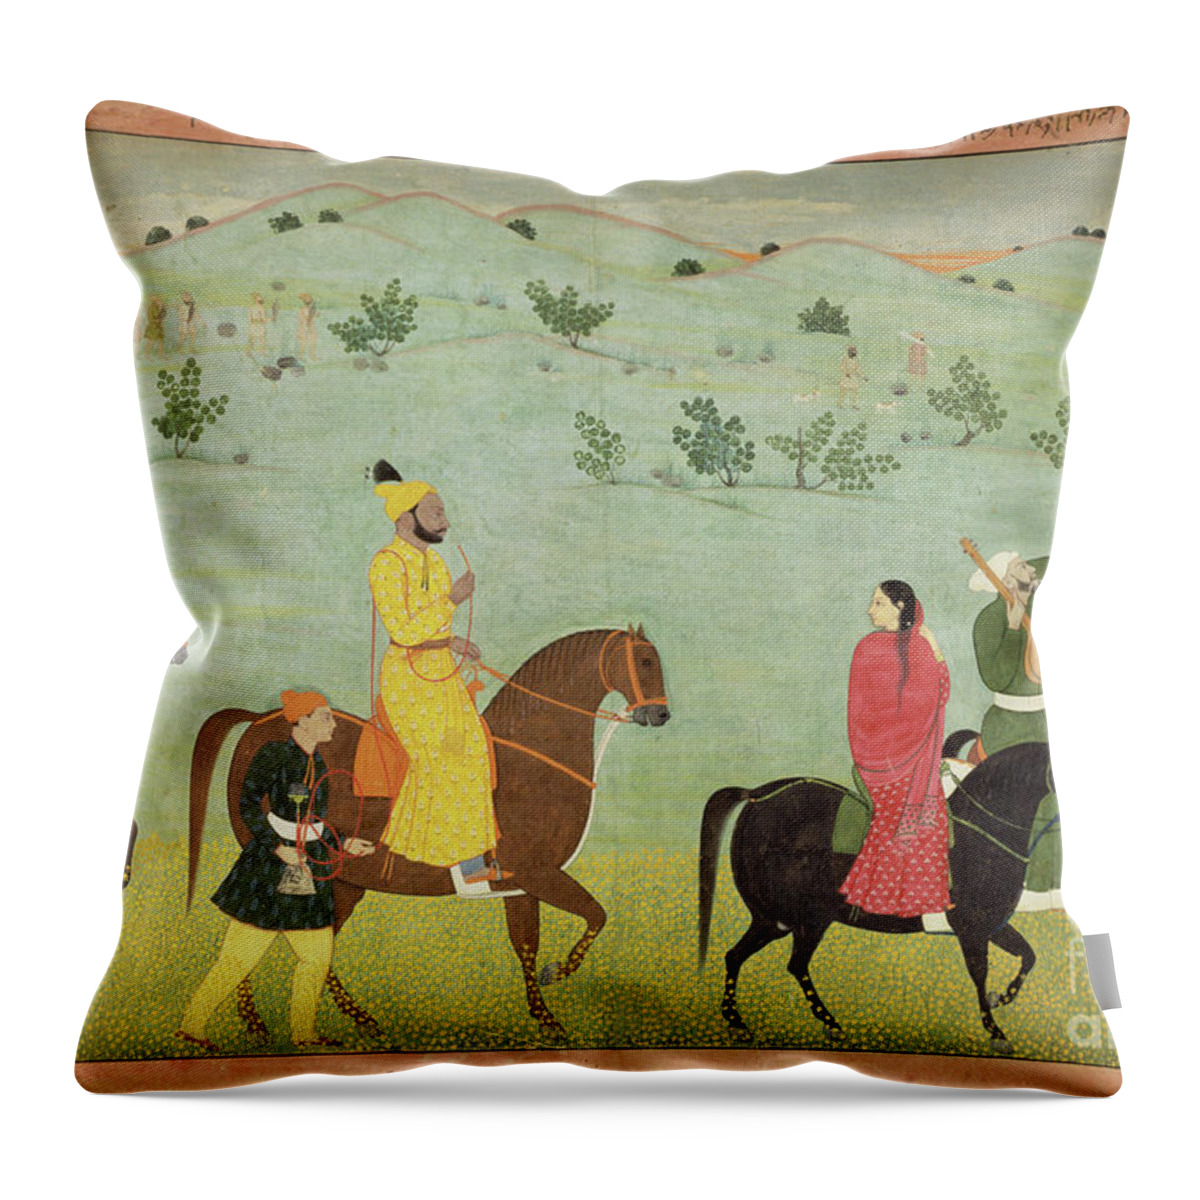 Horse Throw Pillow featuring the painting A Jasrota Prince, Possibly Balwant Singh, On A Riding Expedition, By Nainsukh by Indian School